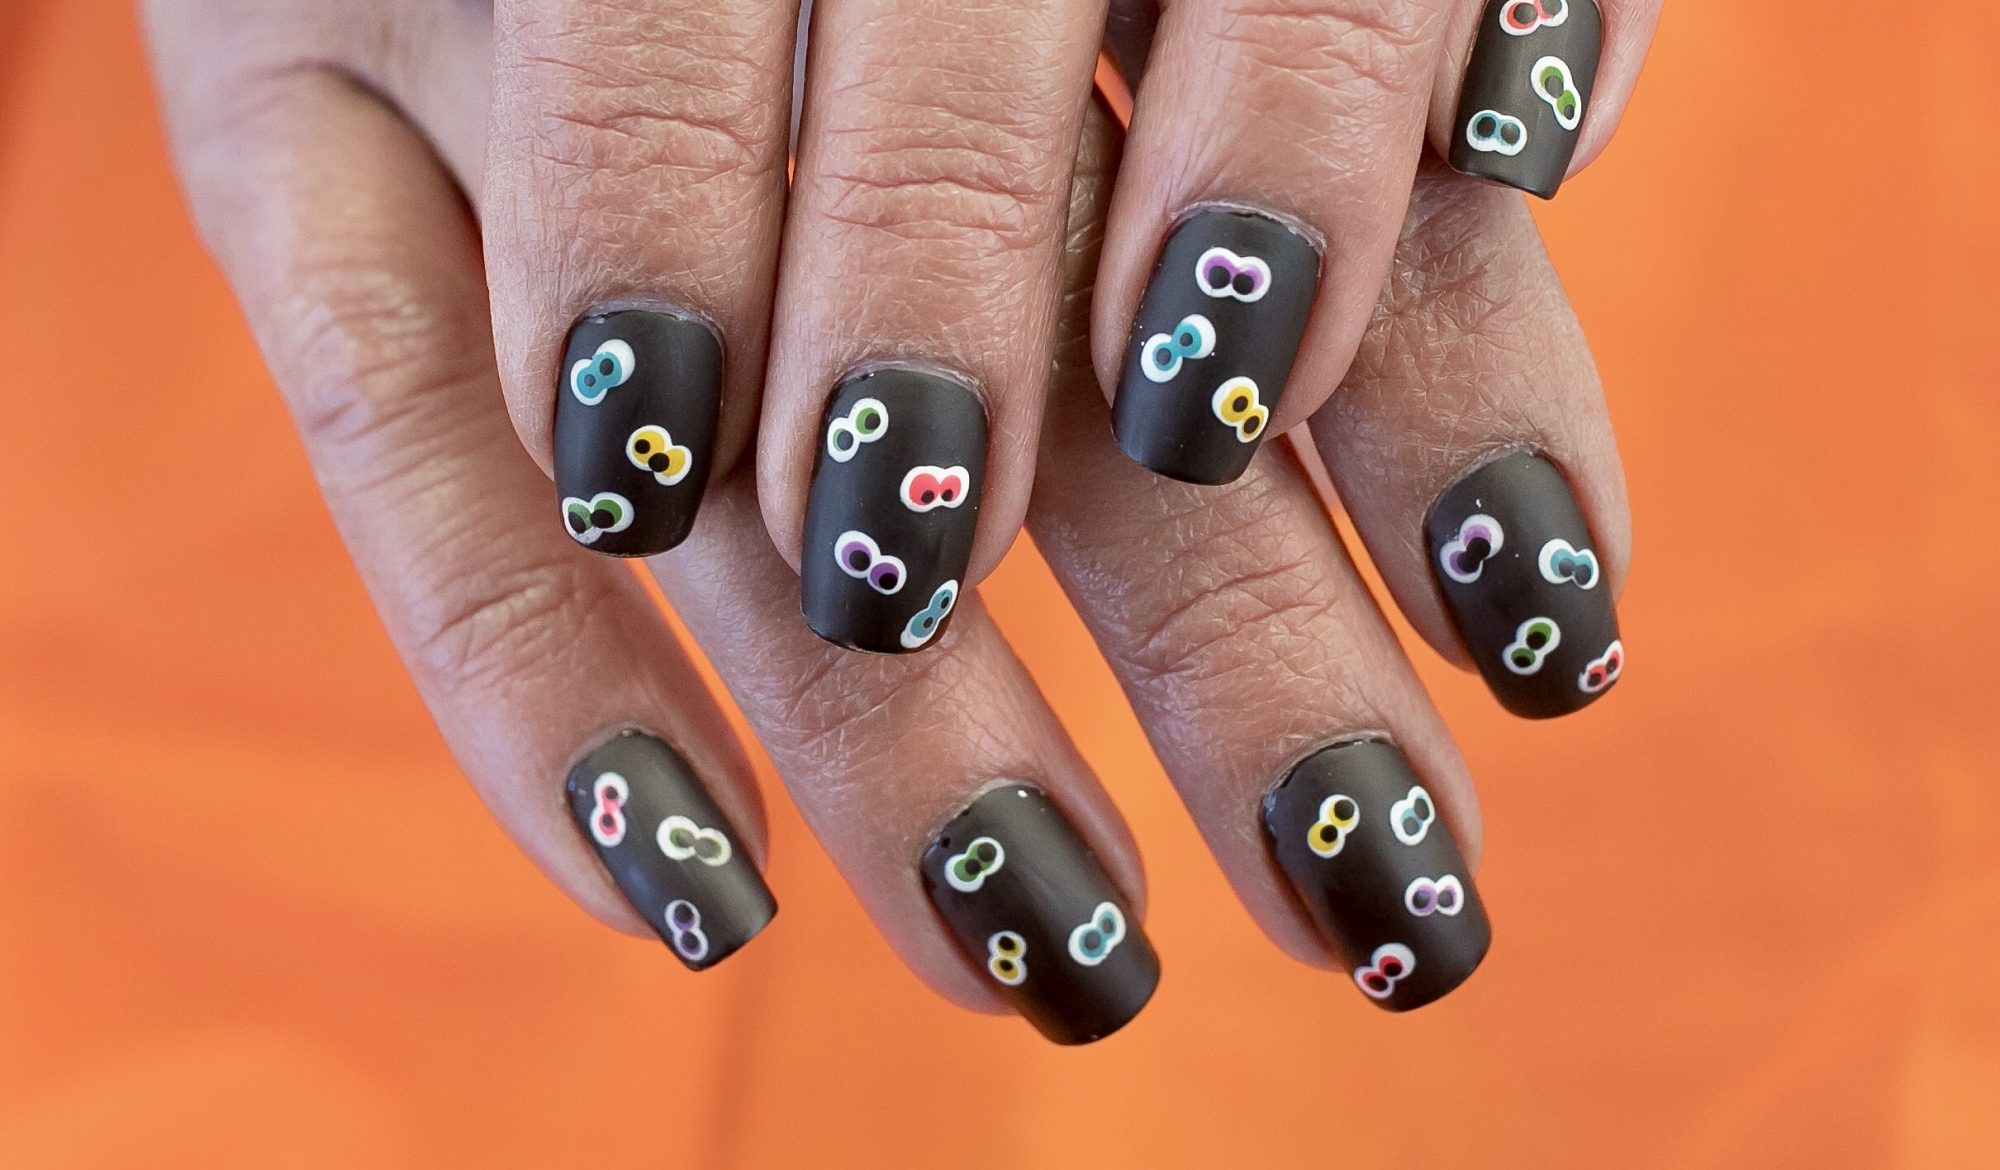 9. DIY Halloween Nail Decal Designs by Pinterest - wide 1